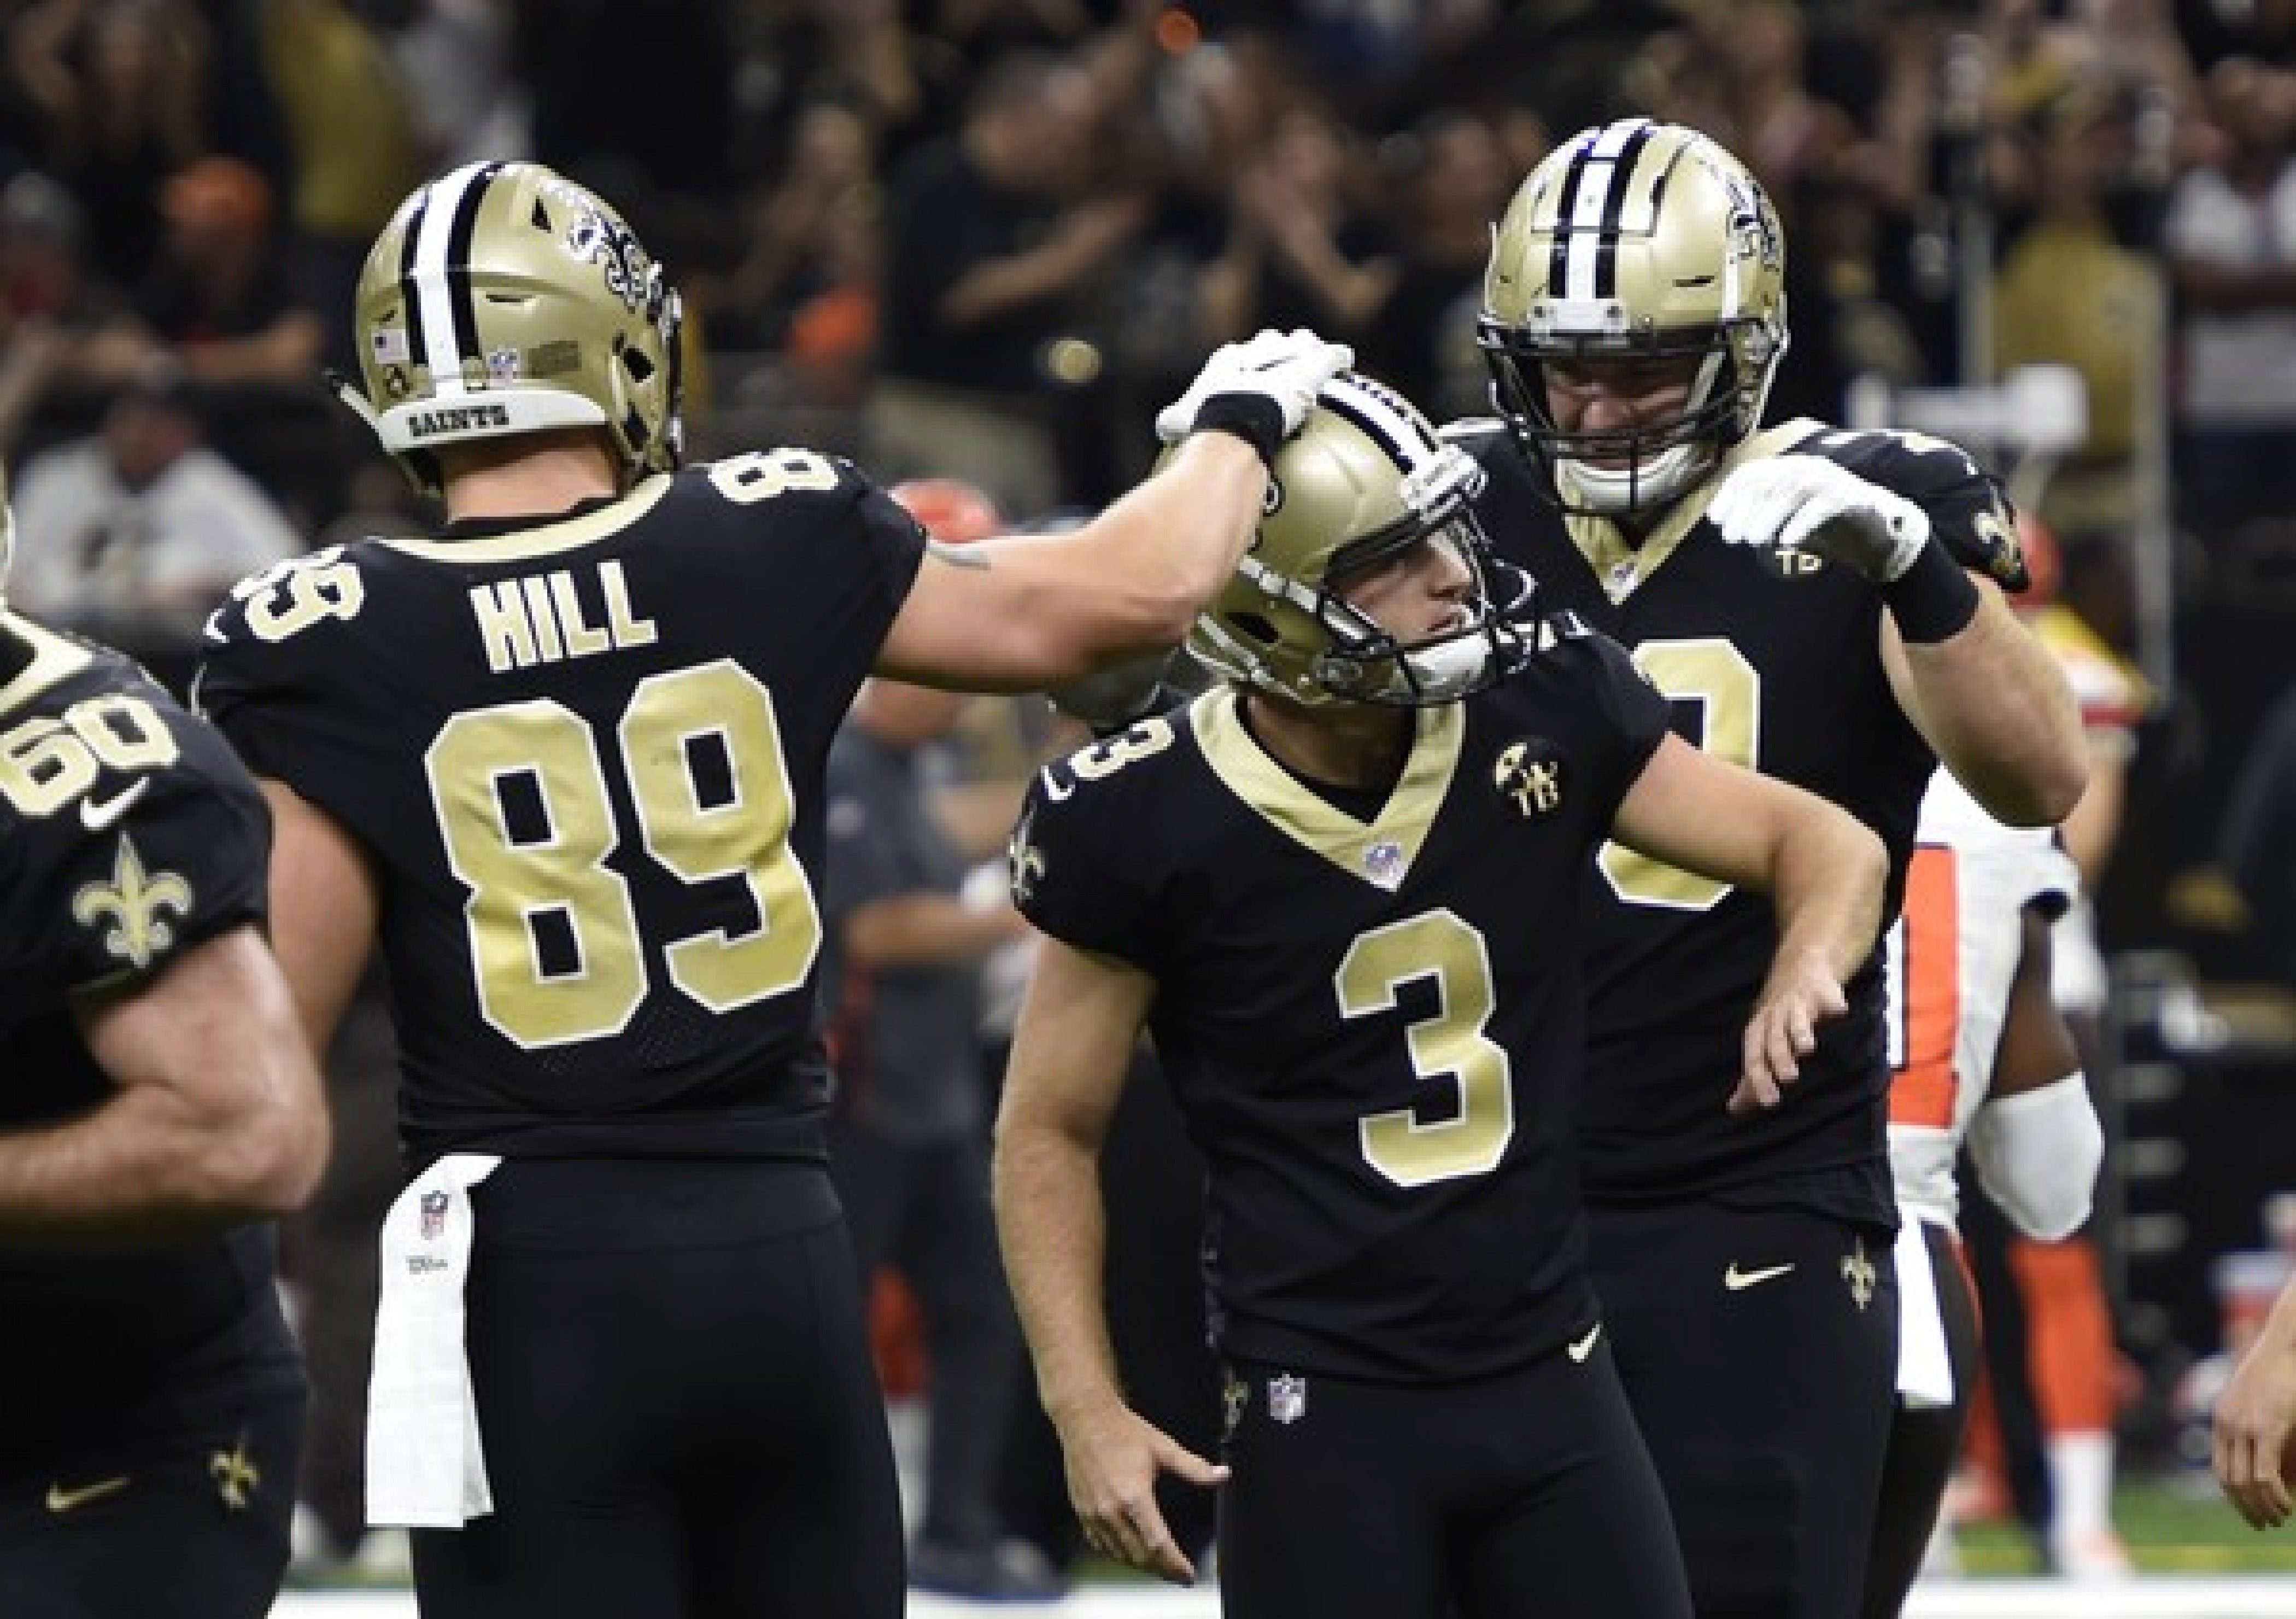 New Orleans Saints edge the Cleveland Browns 21-18